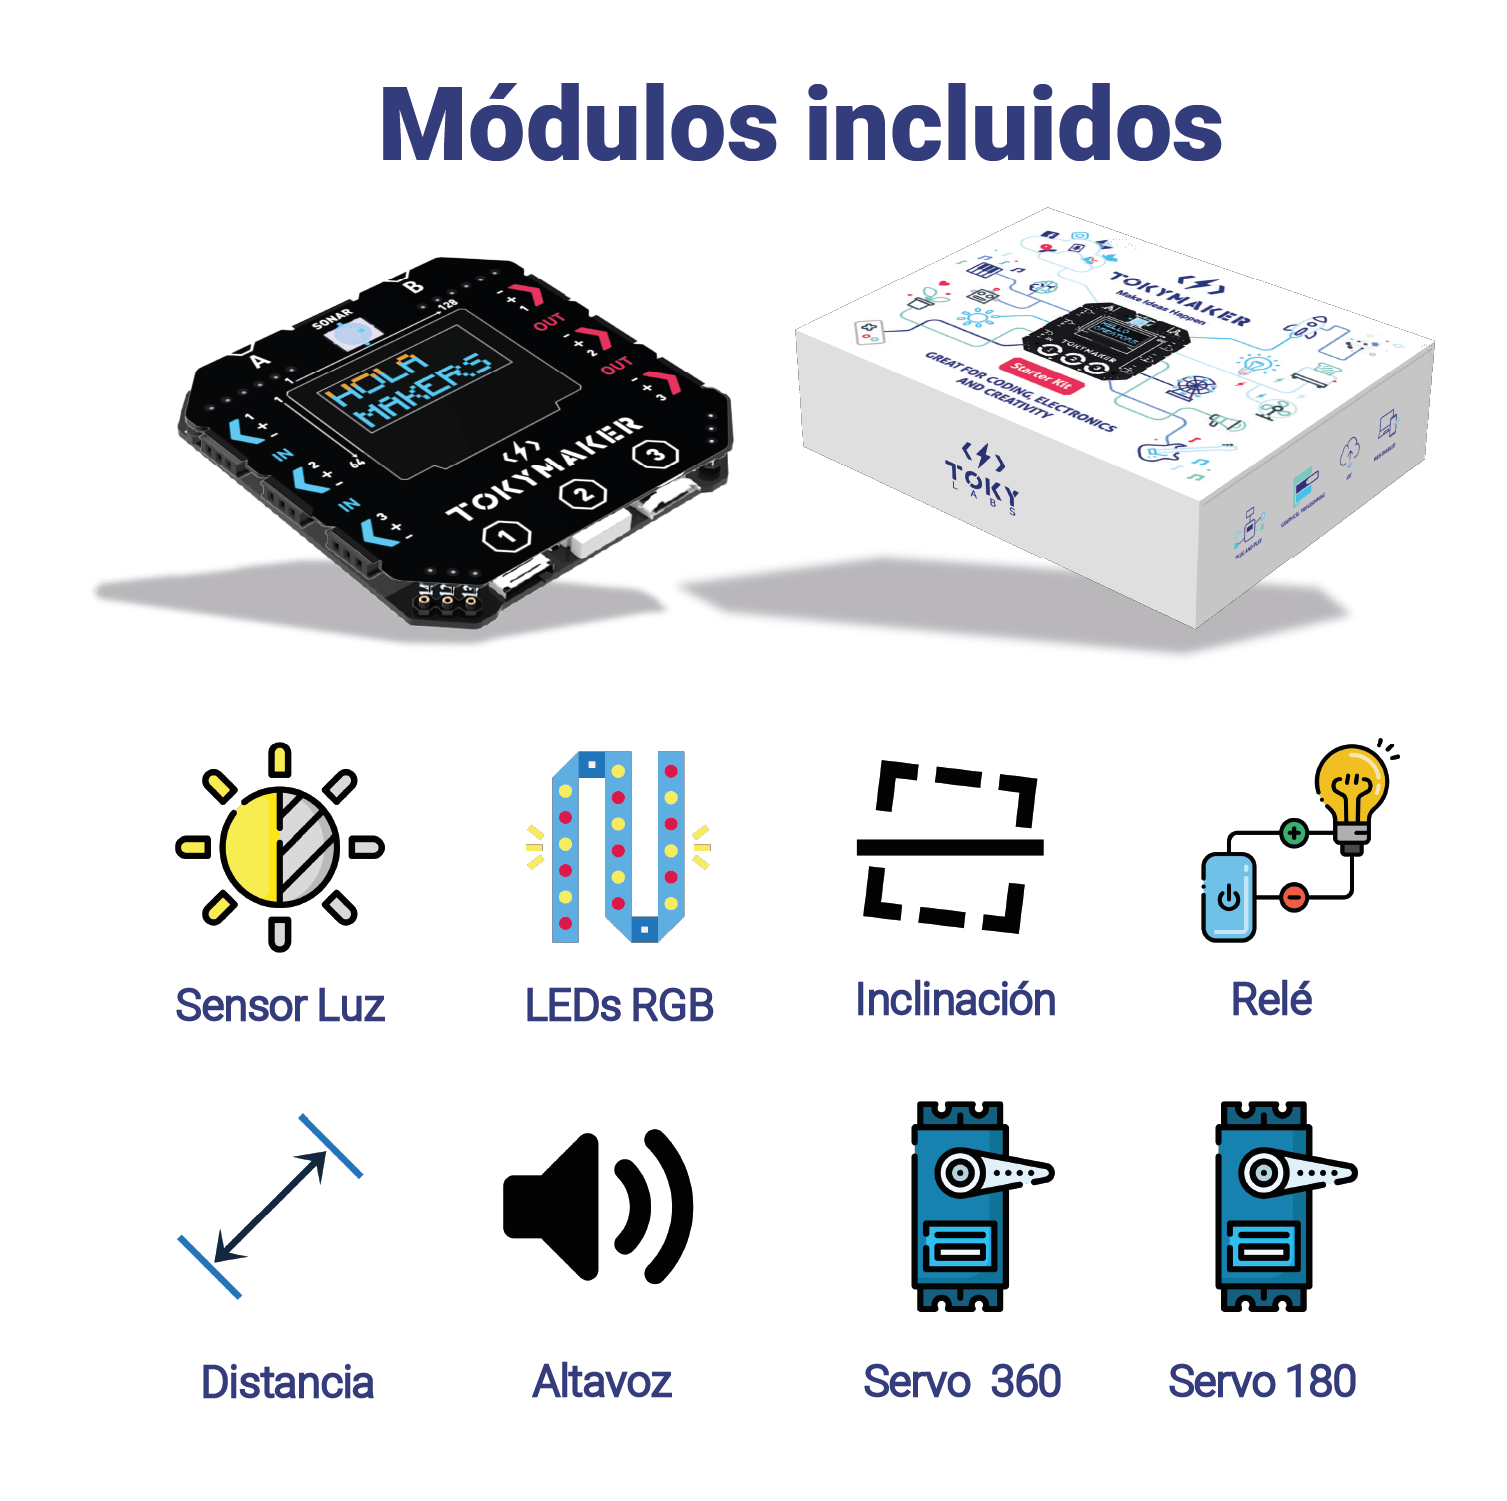 It contains all you need to integrate technology transversally in your class. Great for science, music, maths, electronics, coding, mechanics, and much more!